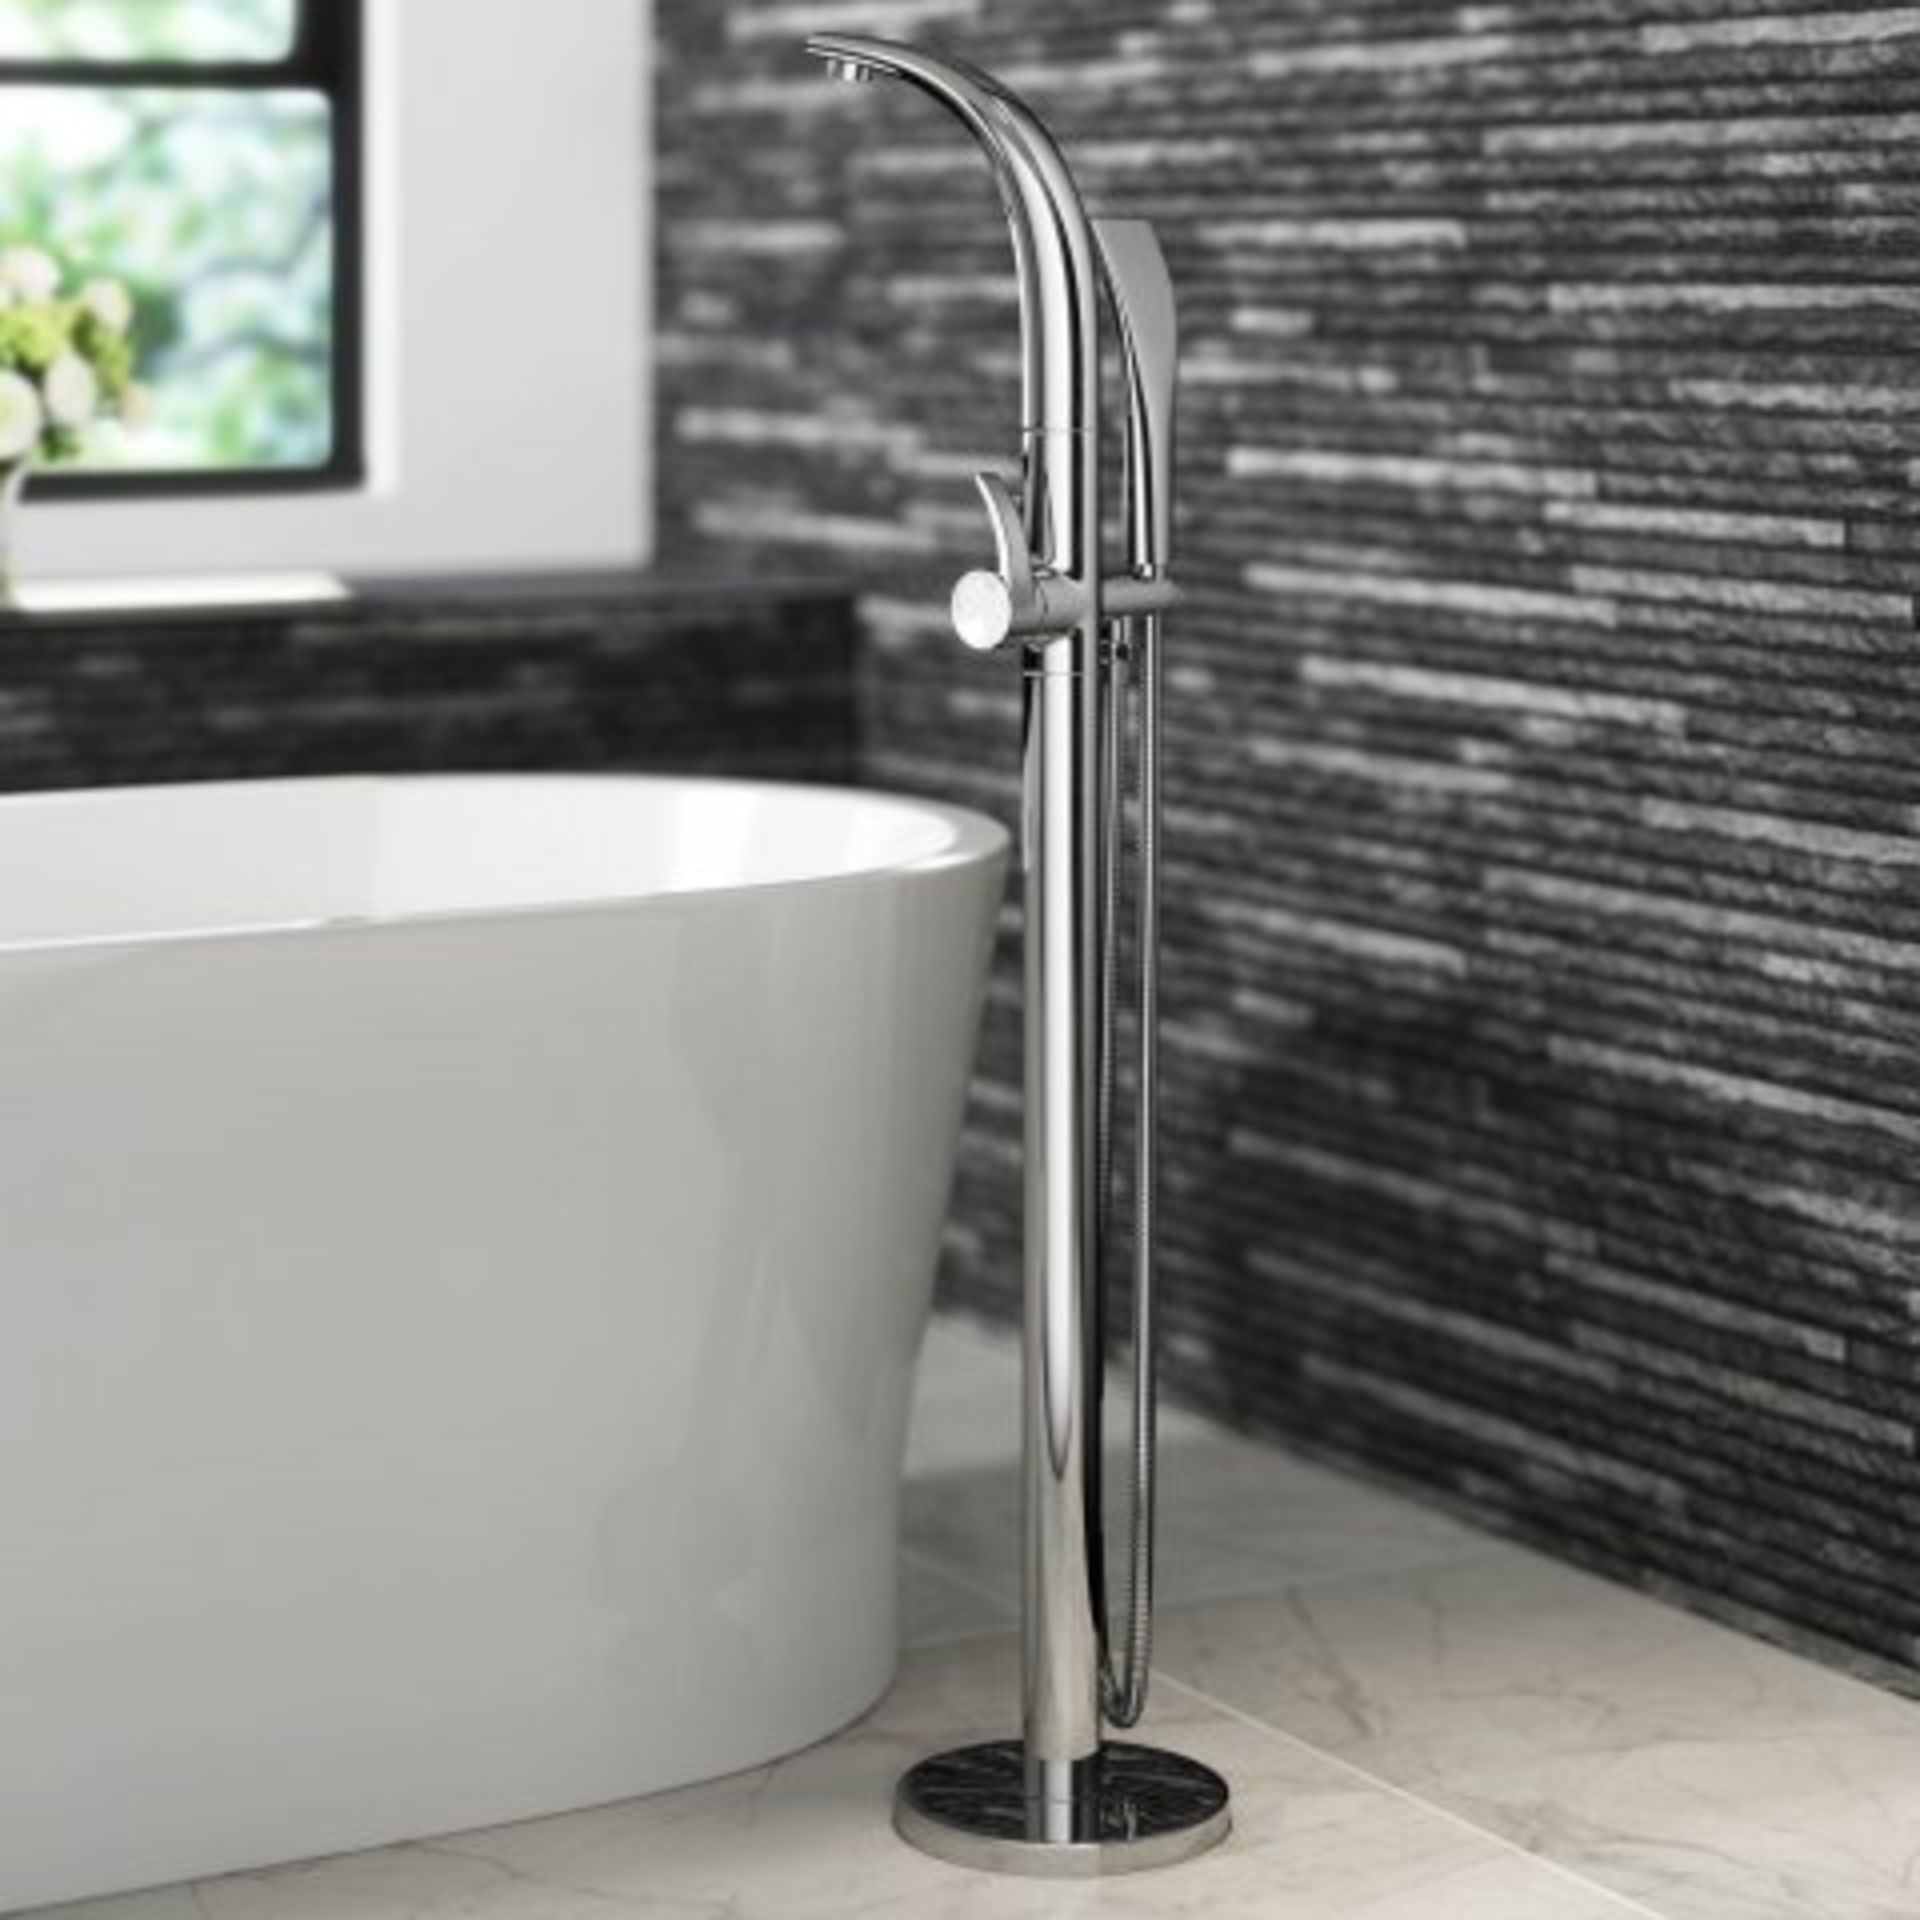 (M3) Vidago Freestanding Bath Mixer Tap with Hand Held Shower Head Add luxury and elegance to your